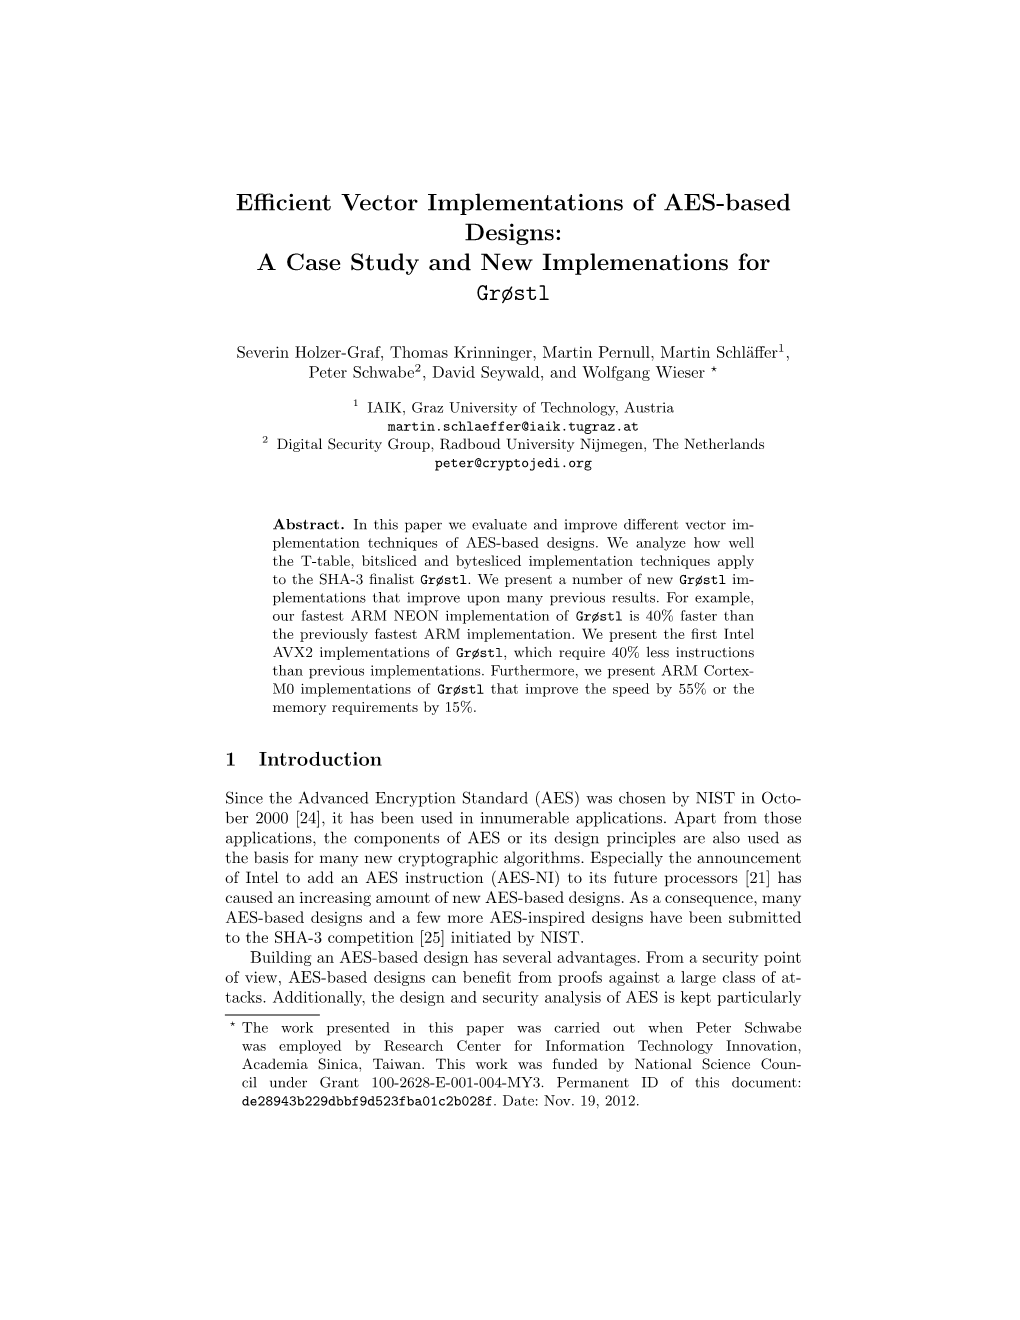 Efficient Vector Implementations of AES-Based Designs